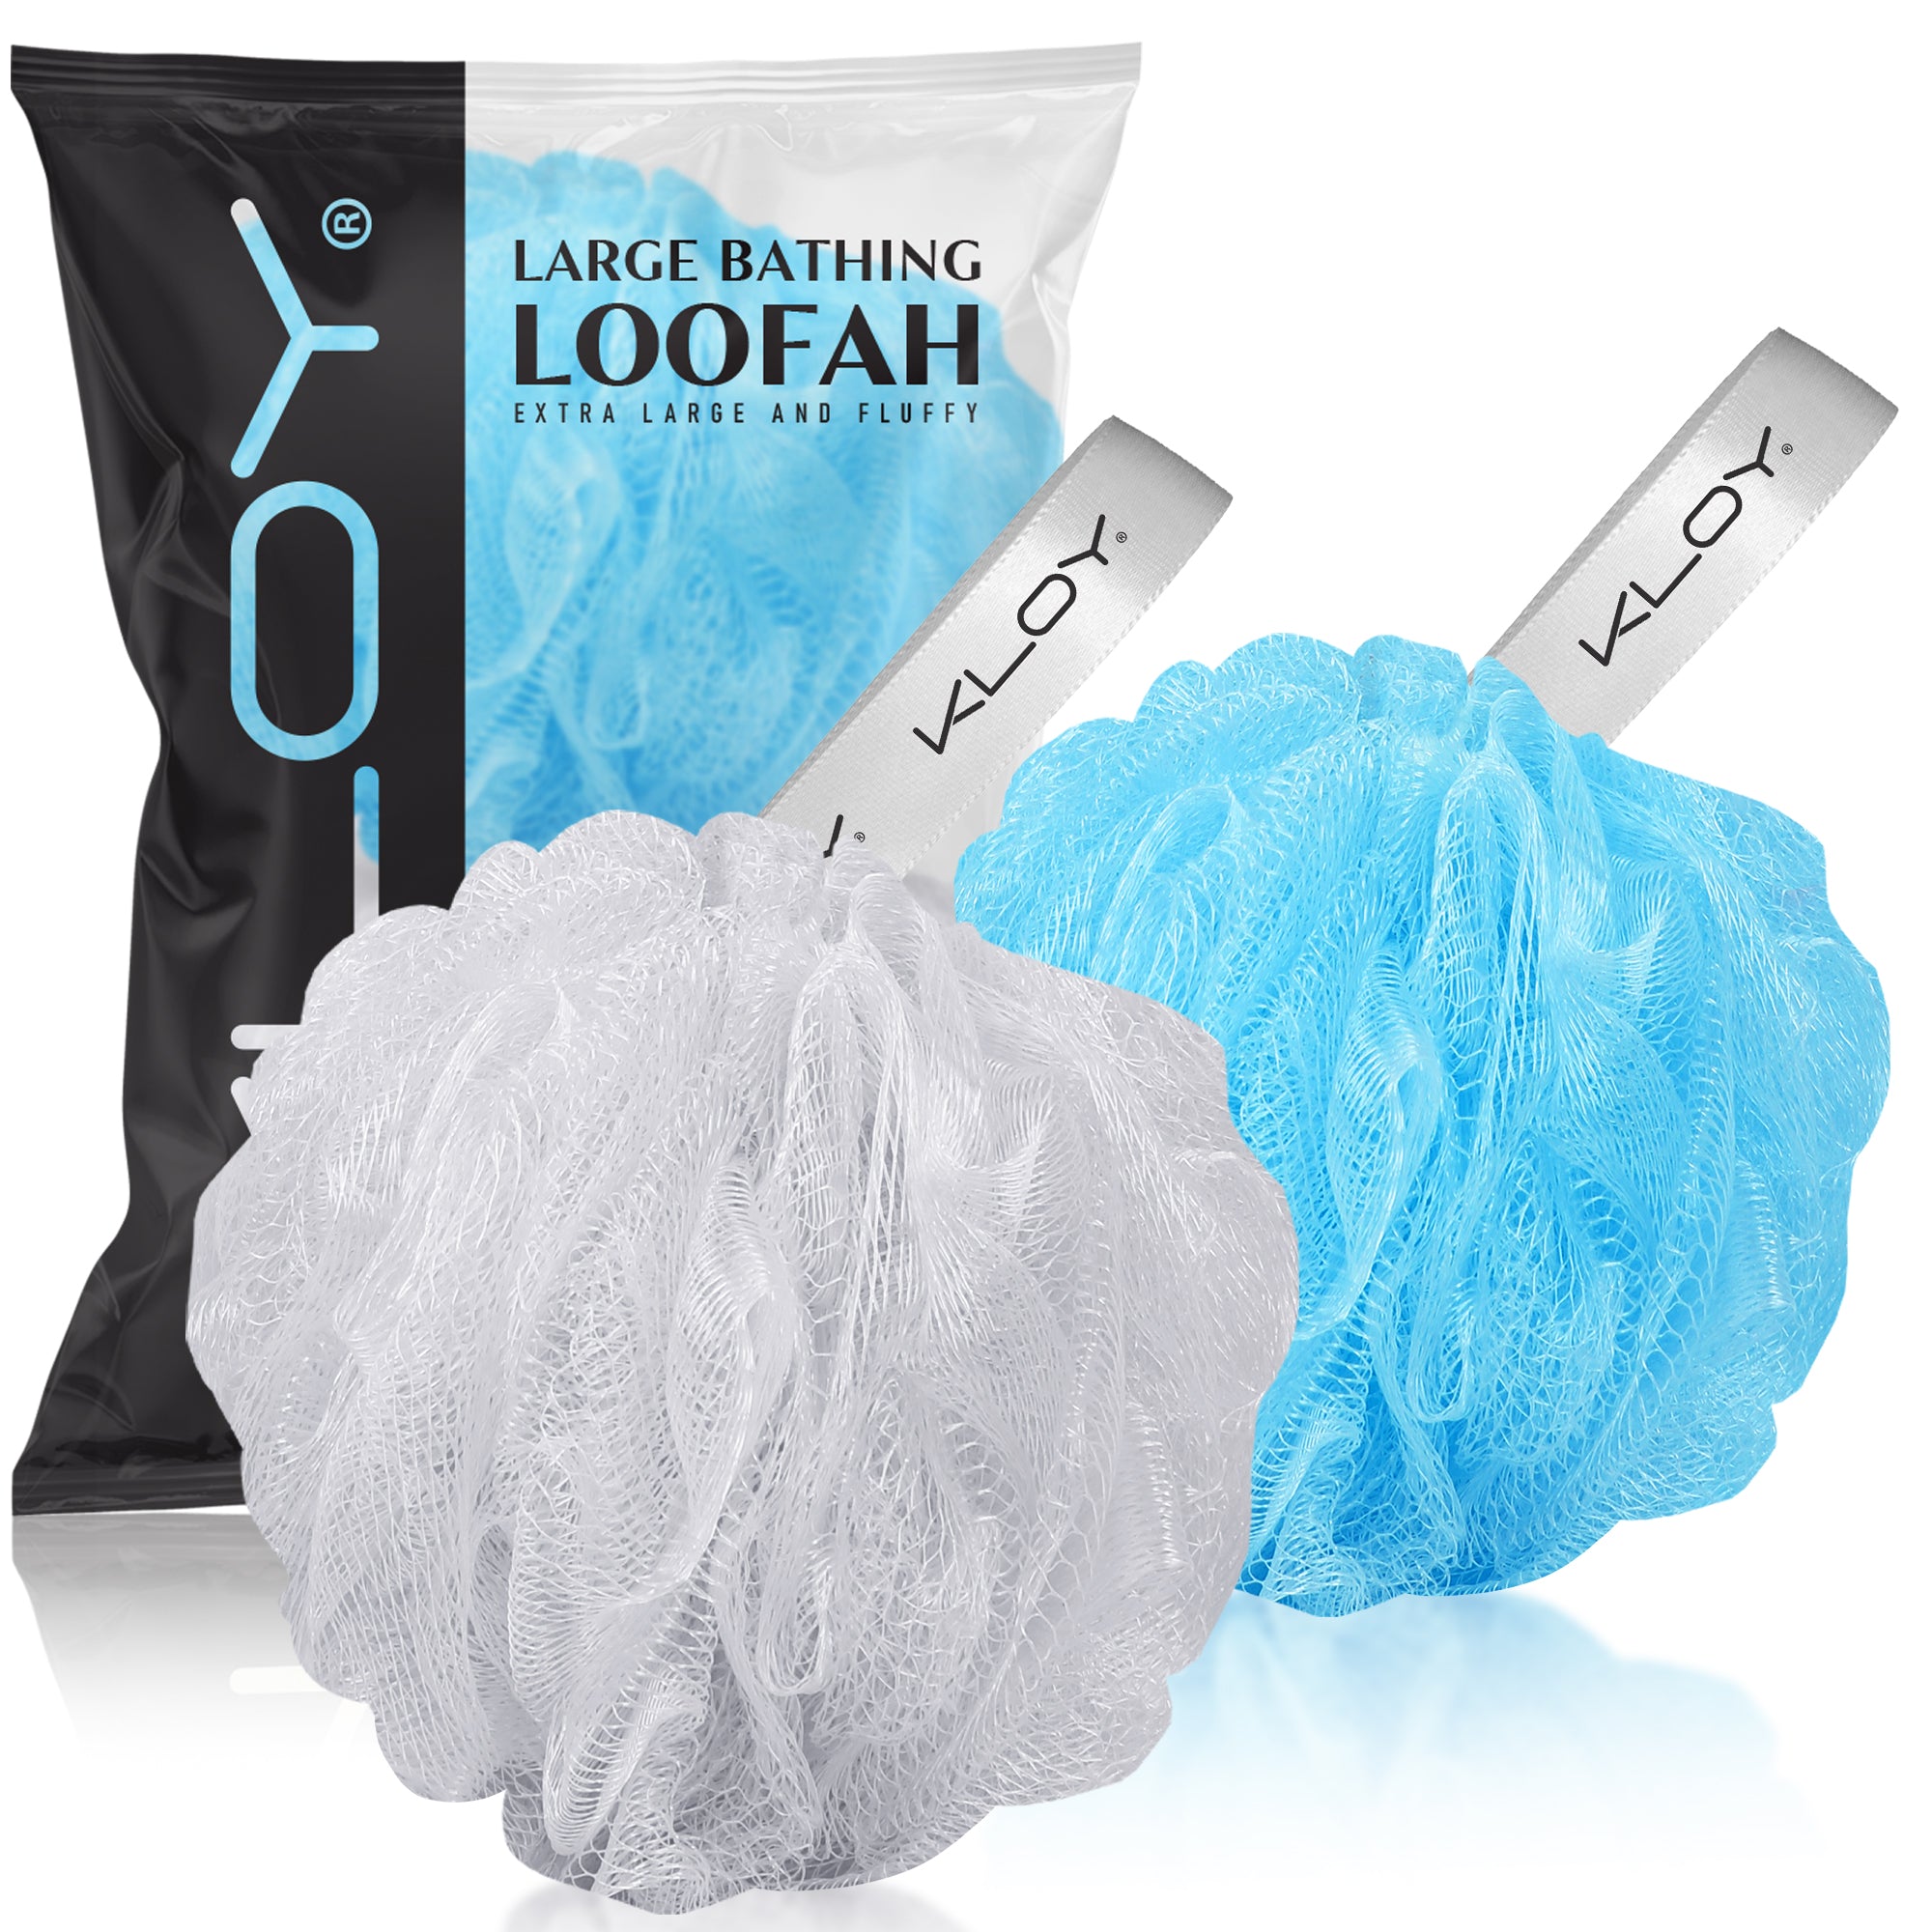 KLOY Large Bath Loofah Sponge Scrubber Exfoliator for High Lather Cleansing, pack of 2 (Peach and Blue)